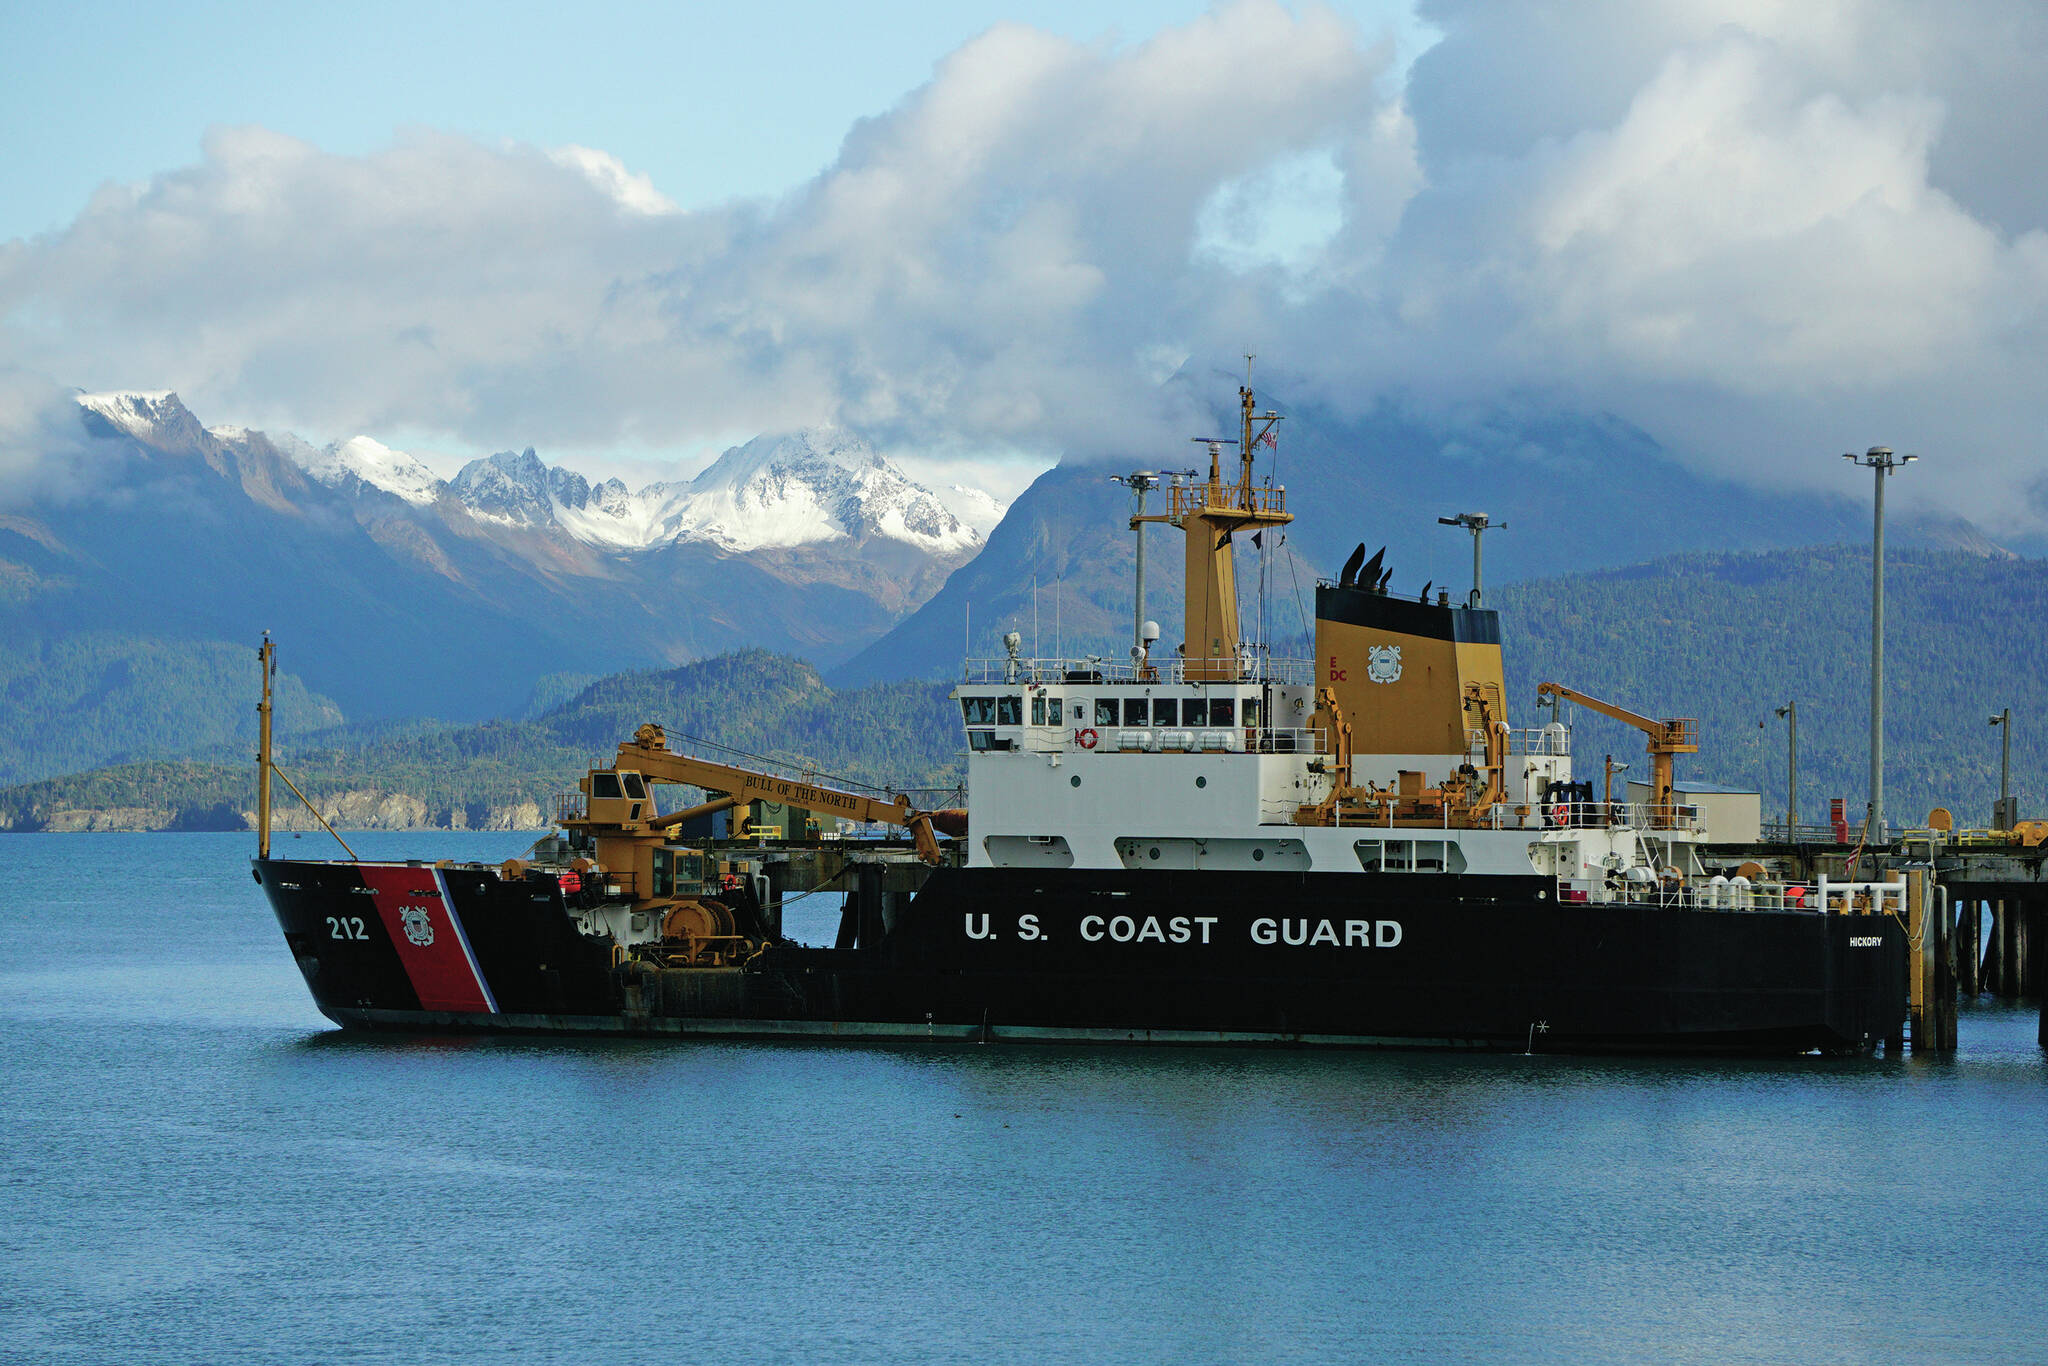 Photo by Michael Armstrong/Homer News

The U.S. Coast Guard Cutter Hickory is moored on Oct. 10 at the Pioneer Dock in Homer. Fresh snow or termination dust covers the peaks of the Kenai Mountains across Kachemak Bay, a sign of the coming winter. (Photo by Michael Armstrong/Homer News)